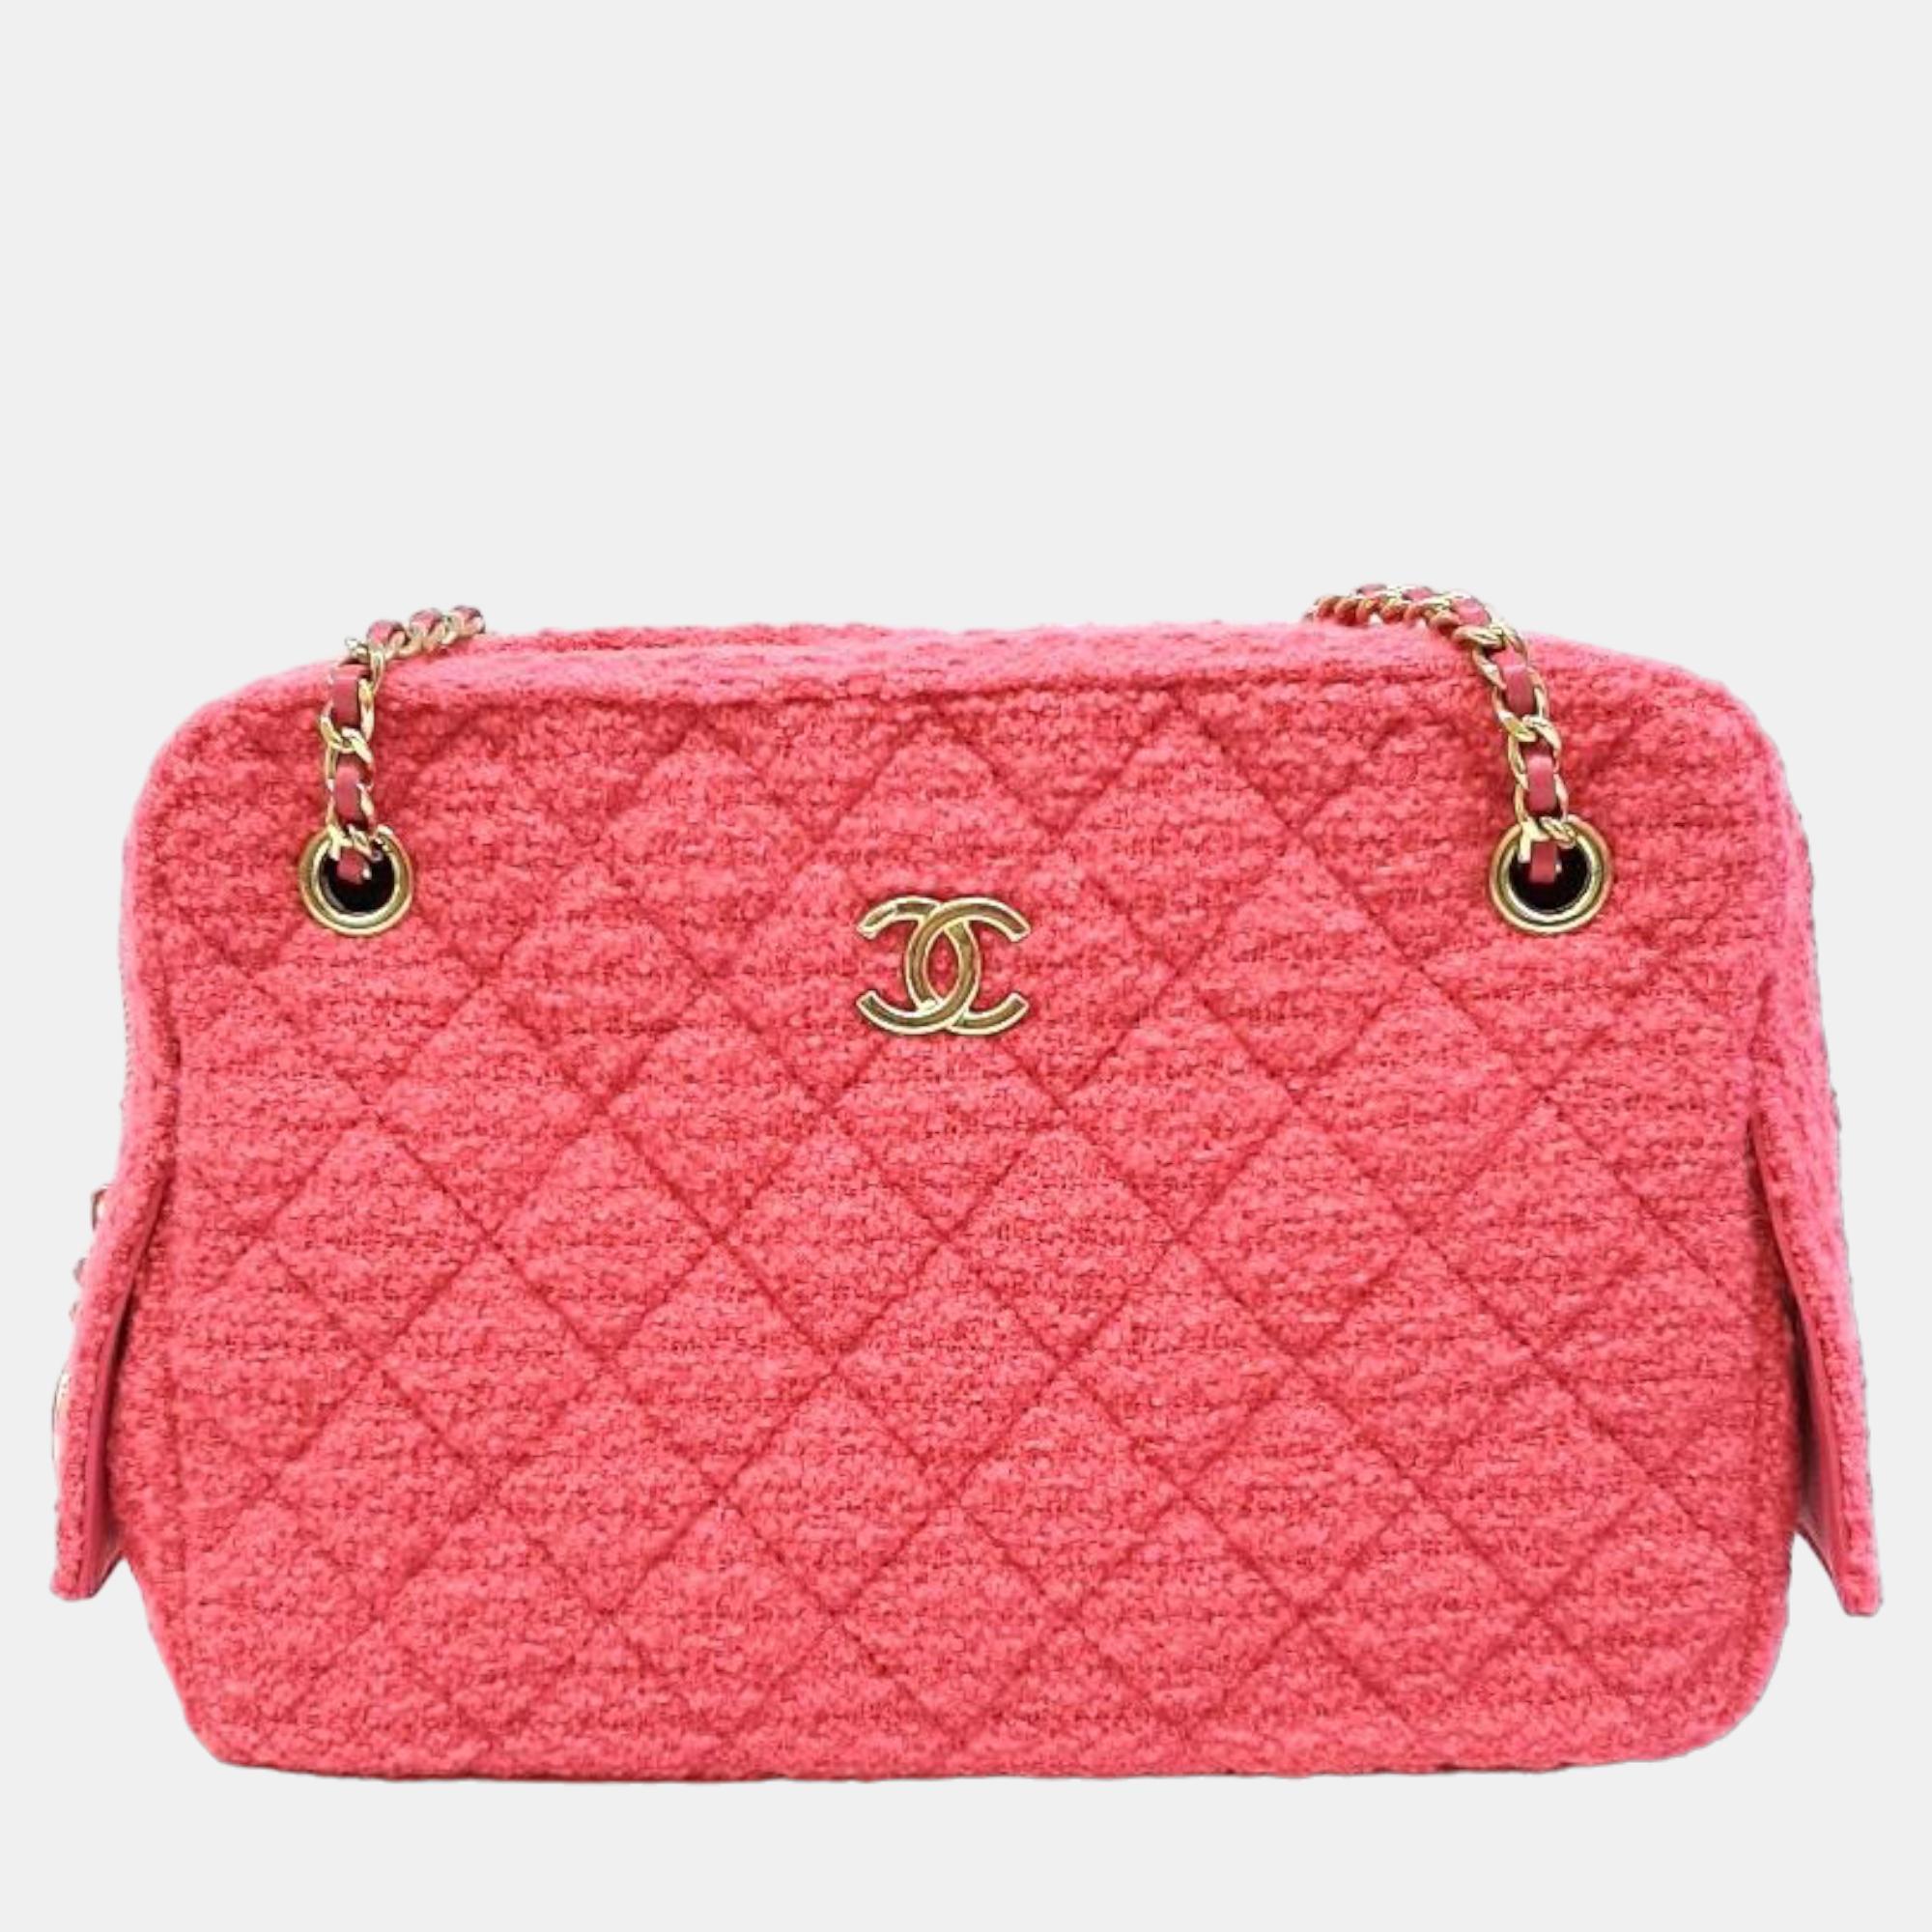 Carry this lovely Chanel bag as a stylish accompaniment to your ensemble. Made from high quality materials it has a luxe look and durable quality.